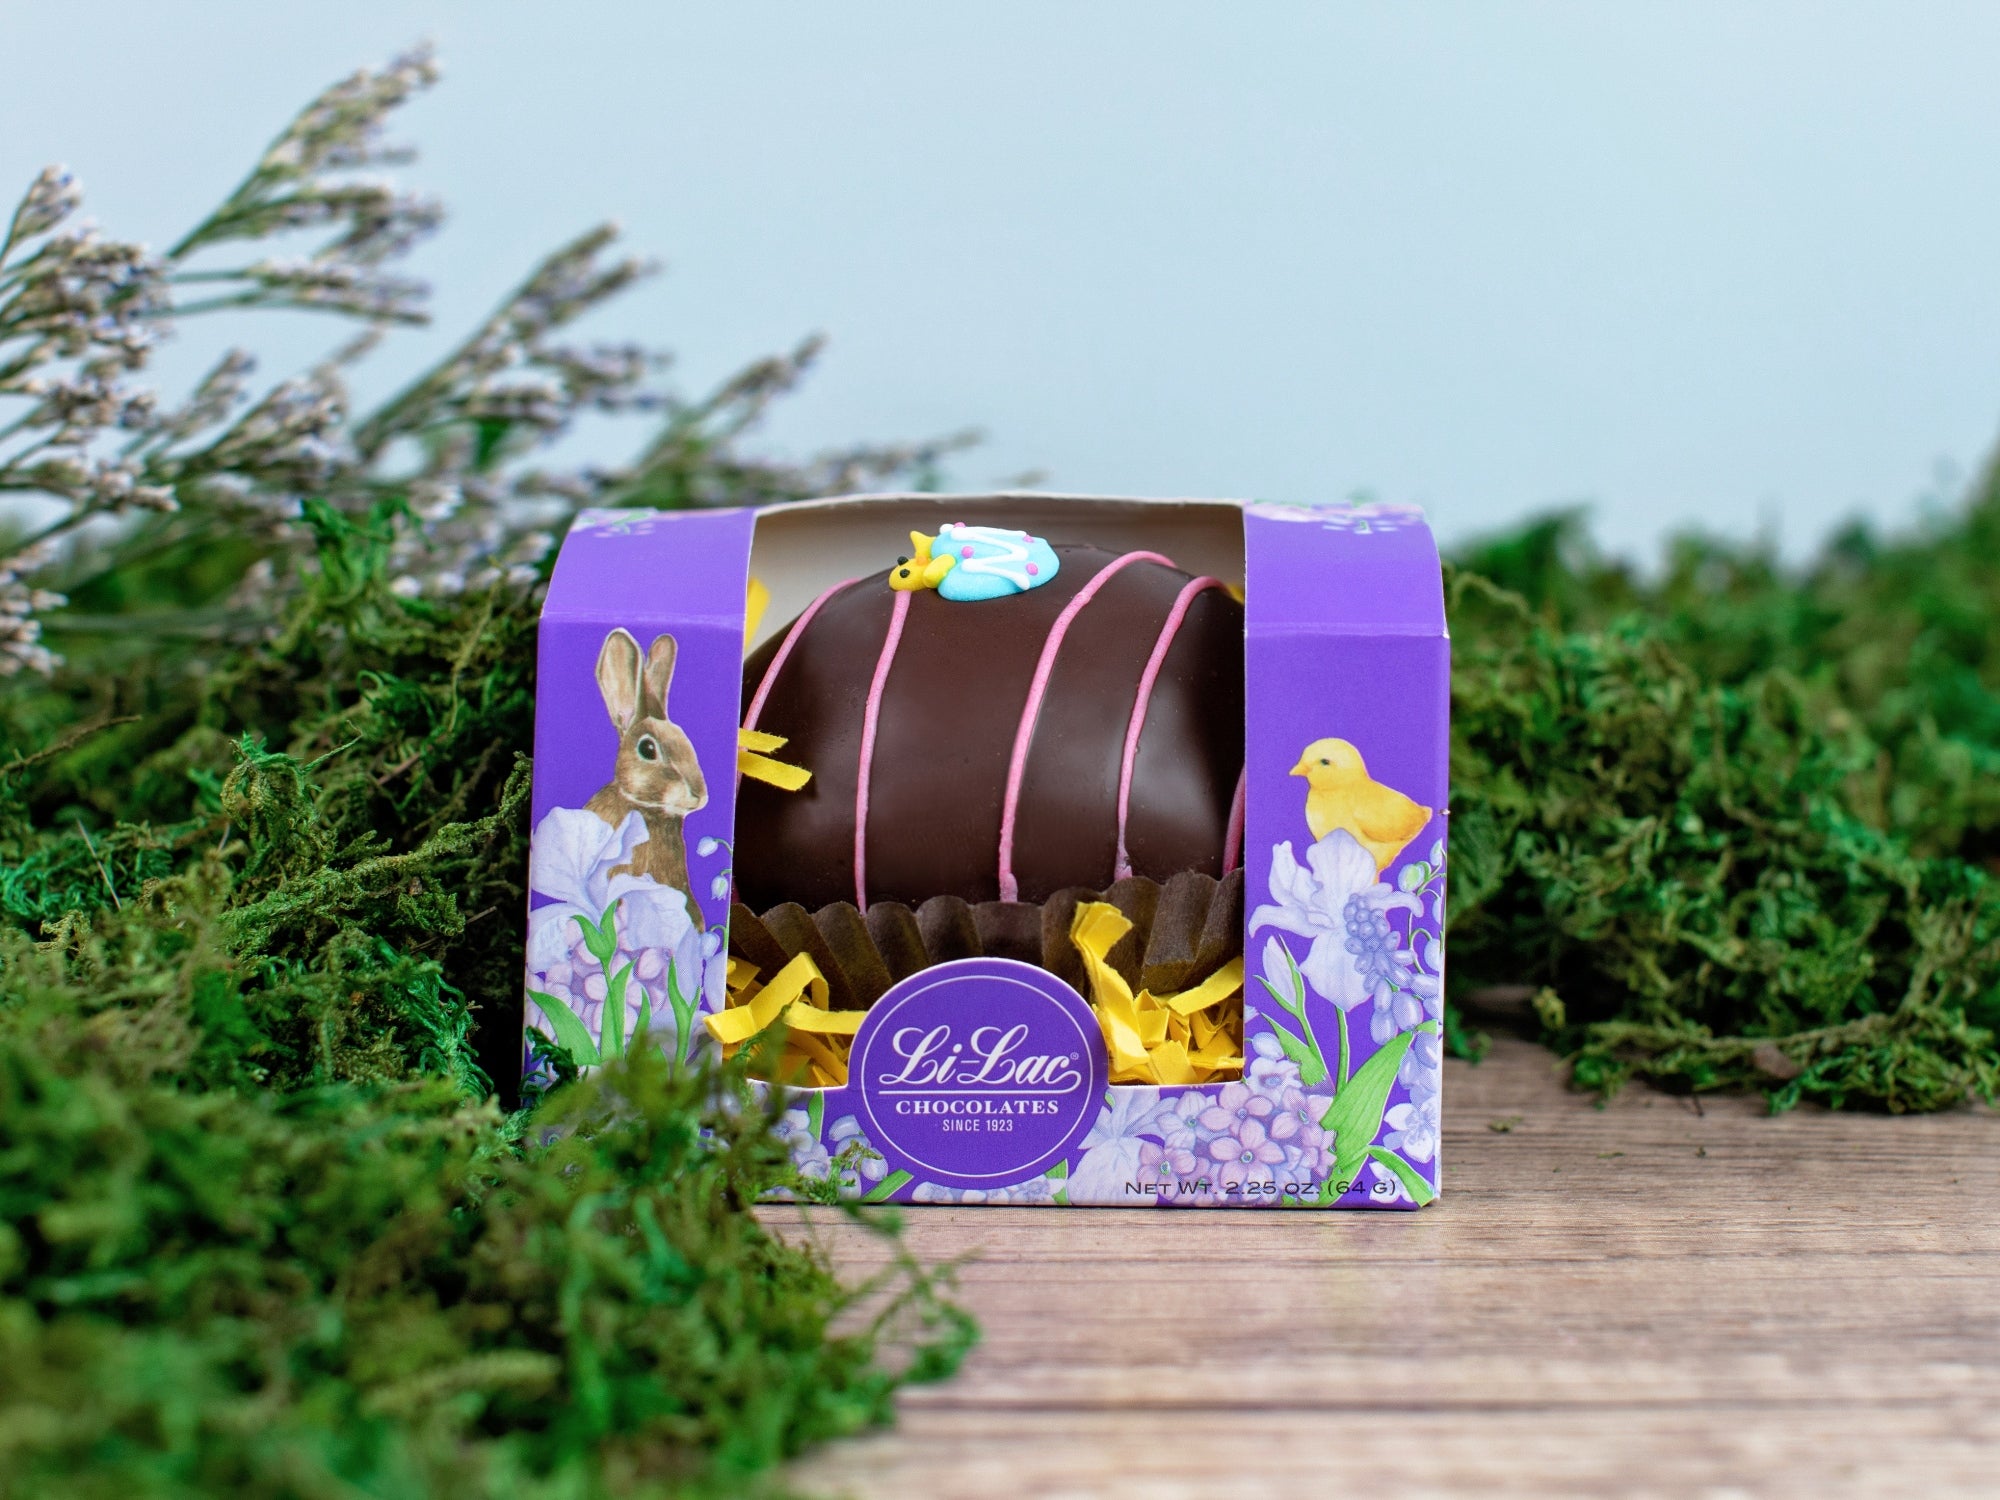 Chocolate-Filled Gourmet Easter Eggs